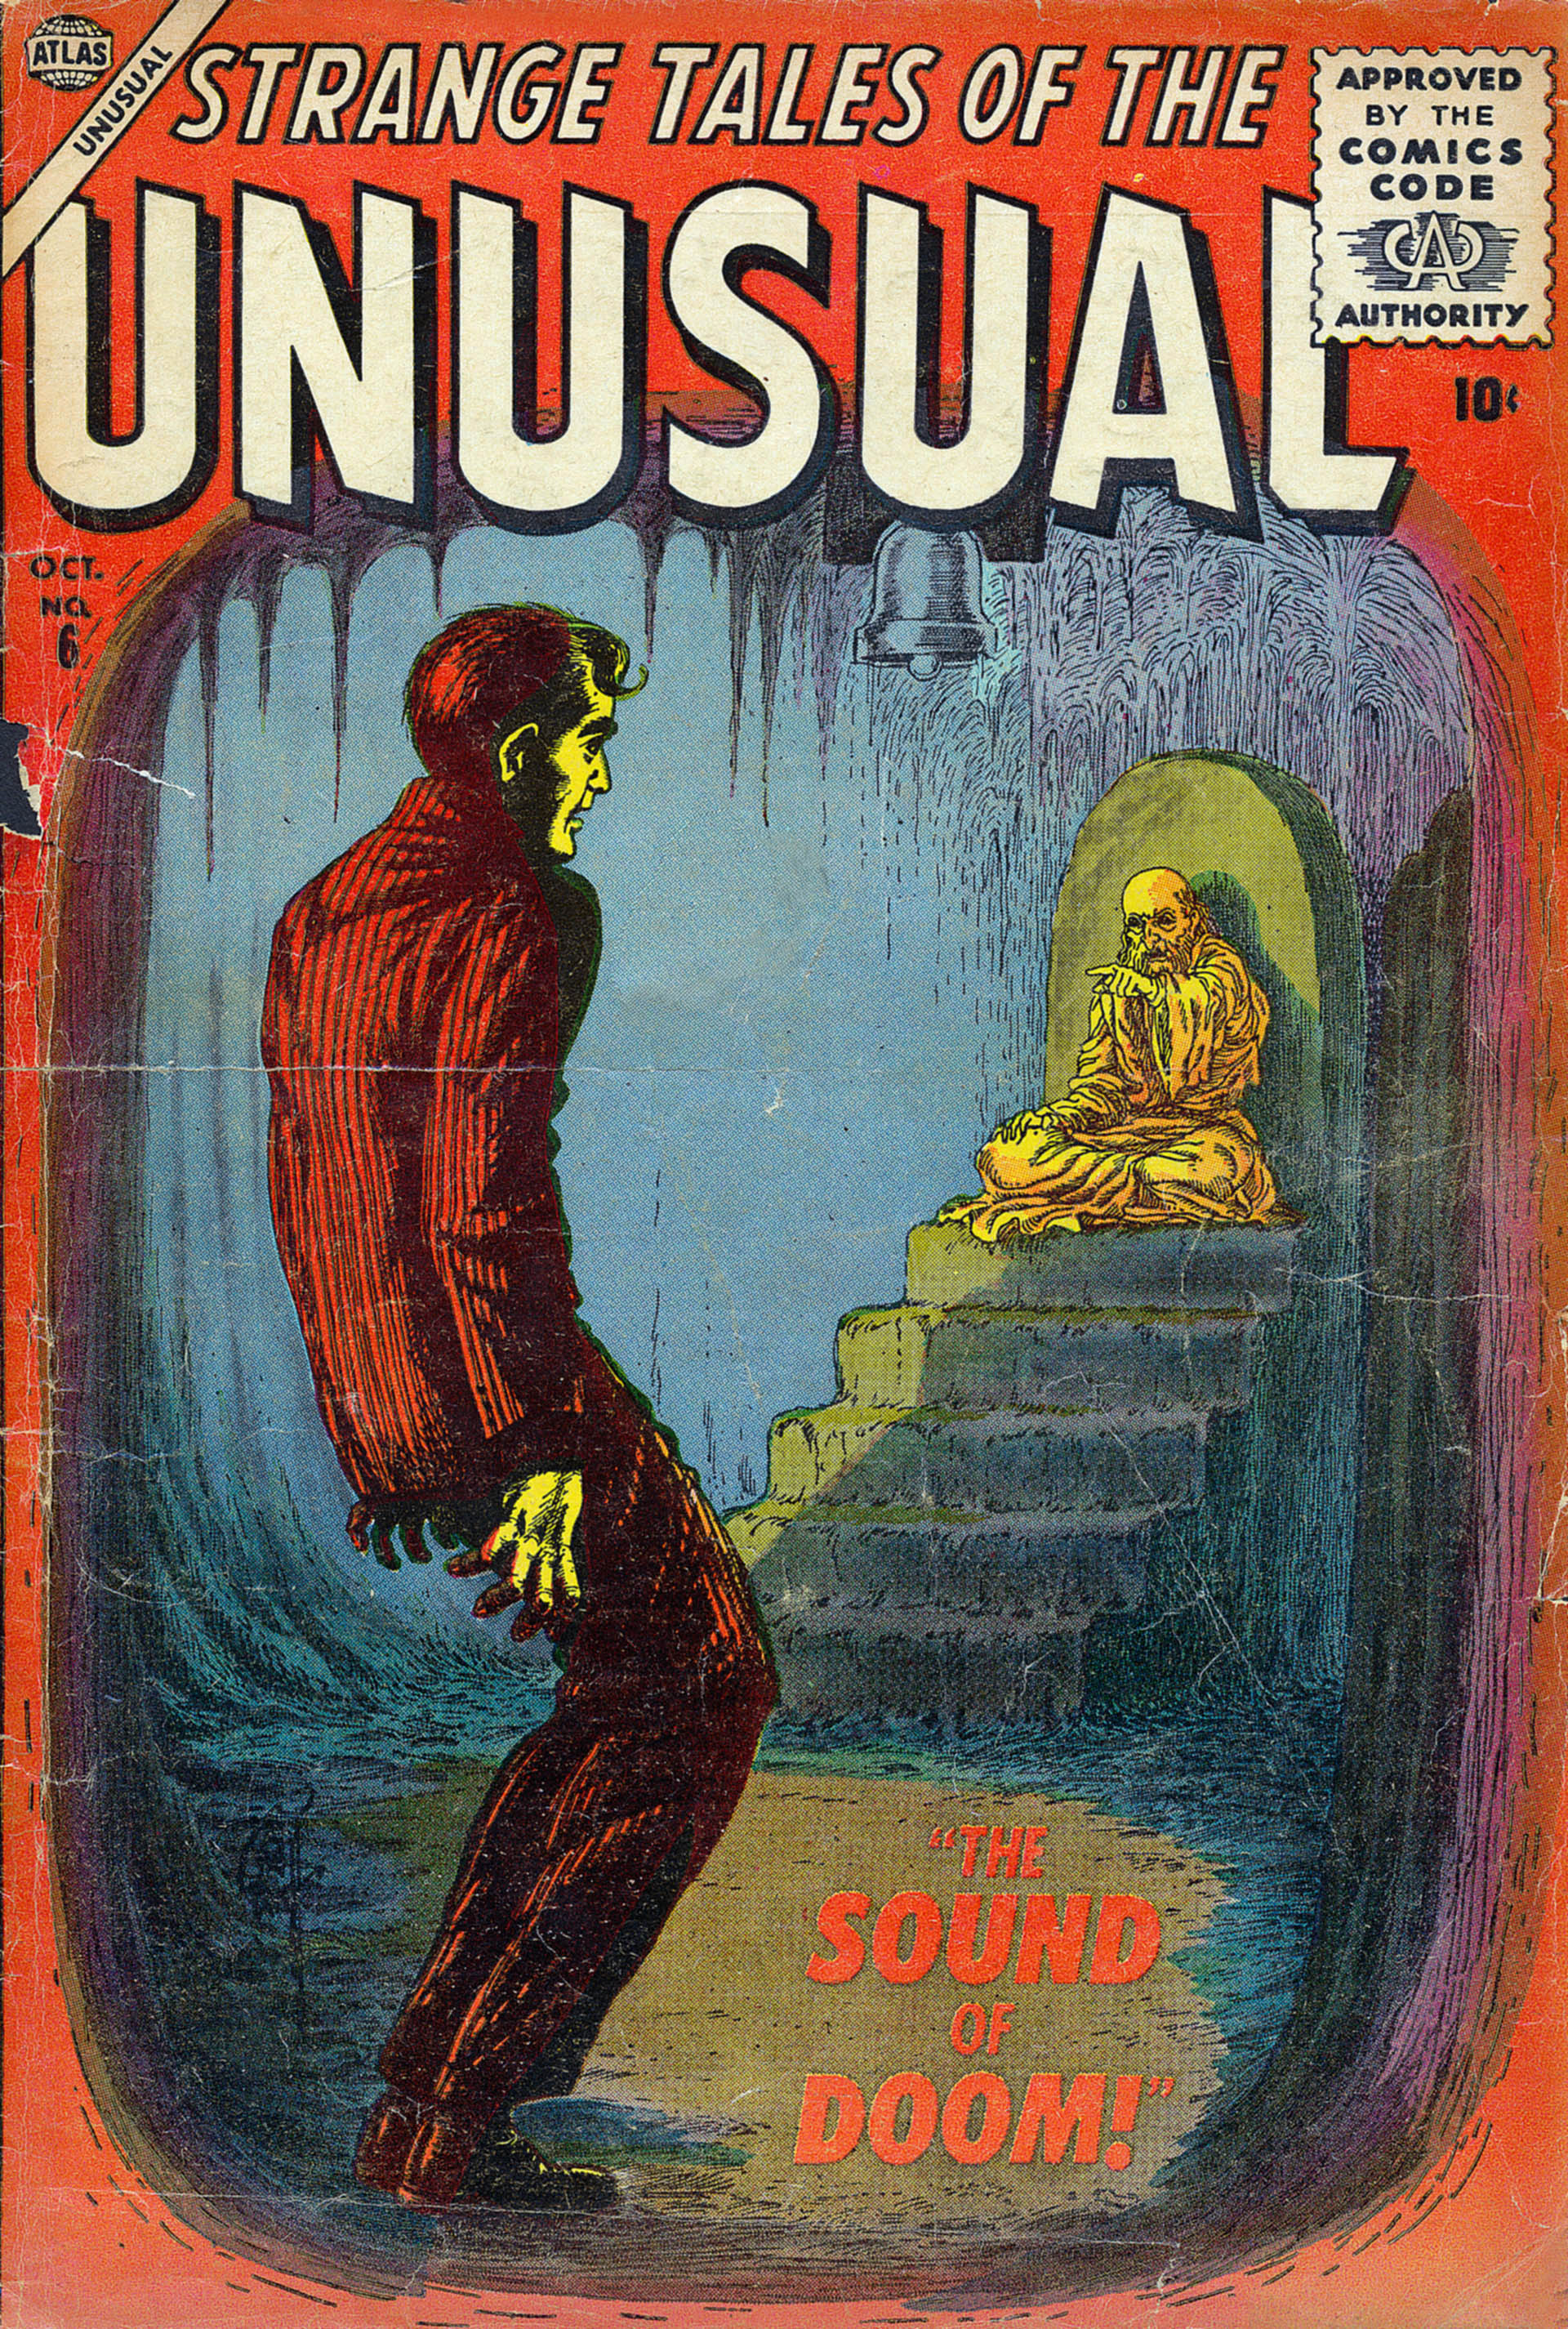 Read online Strange Tales of the Unusual comic -  Issue #6 - 1